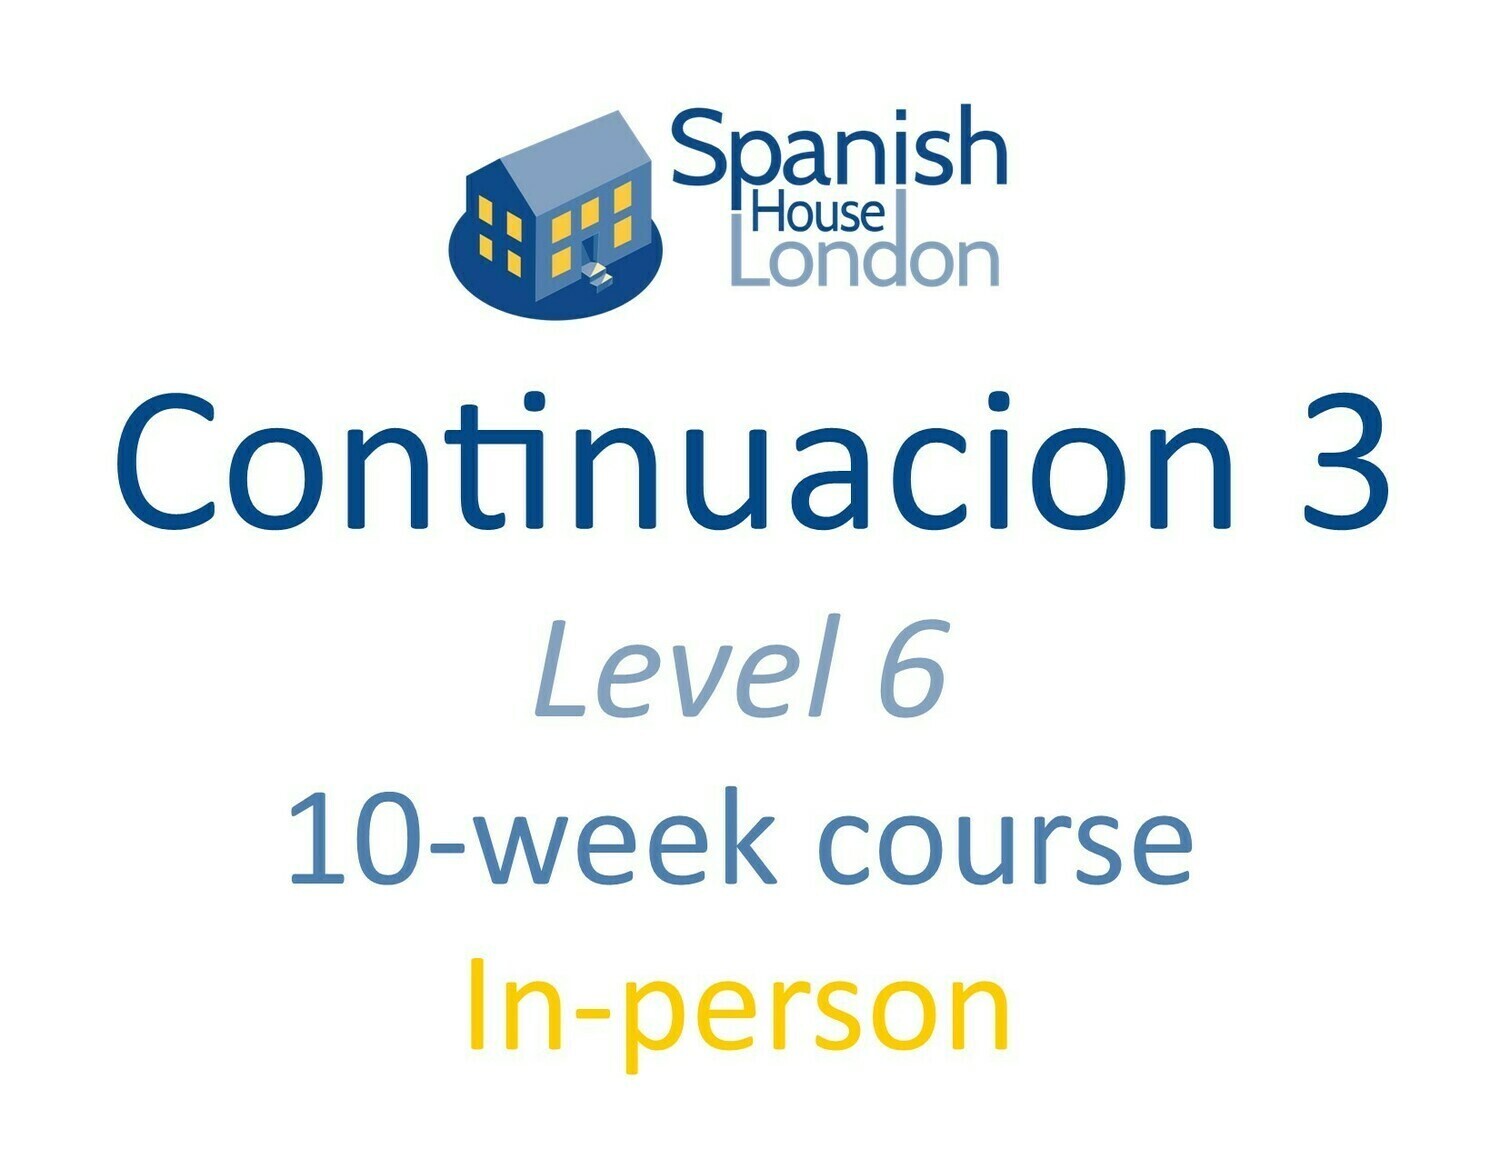 Continuación 3 Course starting on 4th June at 7.30pm in Euston / King's Cross